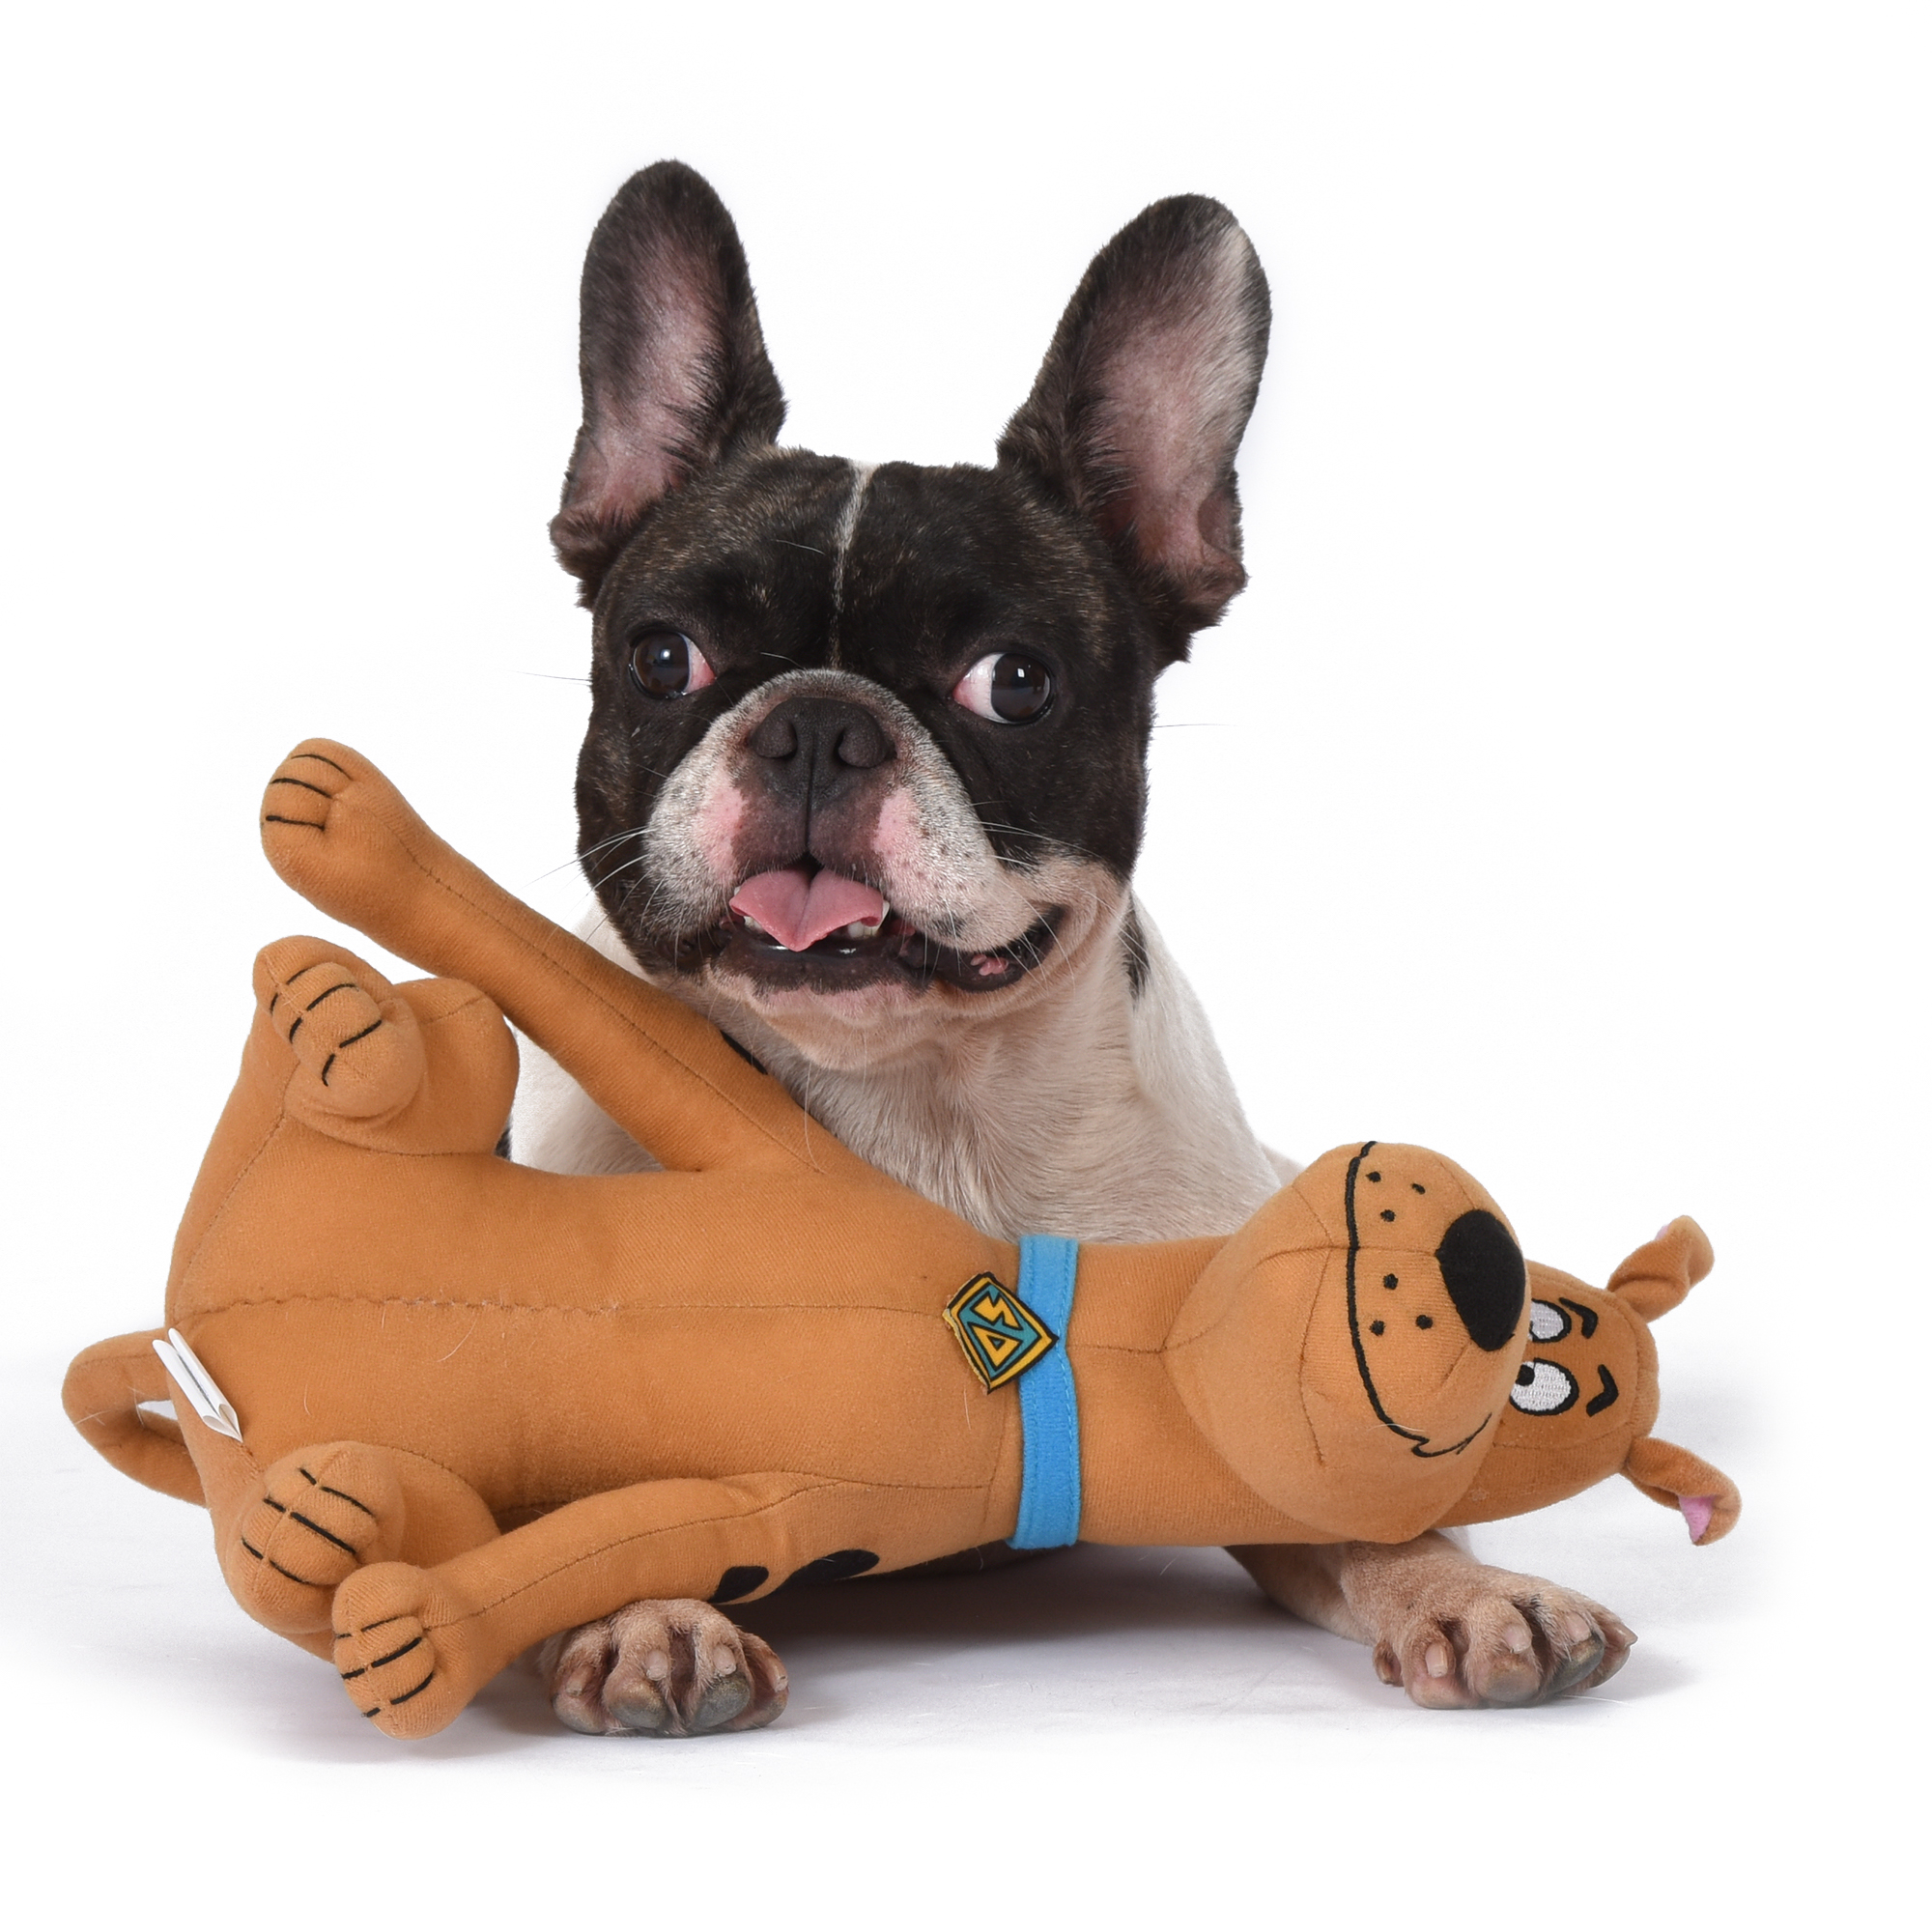 6 Inch Plush Dog Toy for All Dogs Scooby-Doo Warner Brothers Big Head Scrappy-Doo Small Dog Toy Chew Toy for Dogs Toys for Dogs FF12864 Brown Colored Soft Fabric Plush Dog Toy 